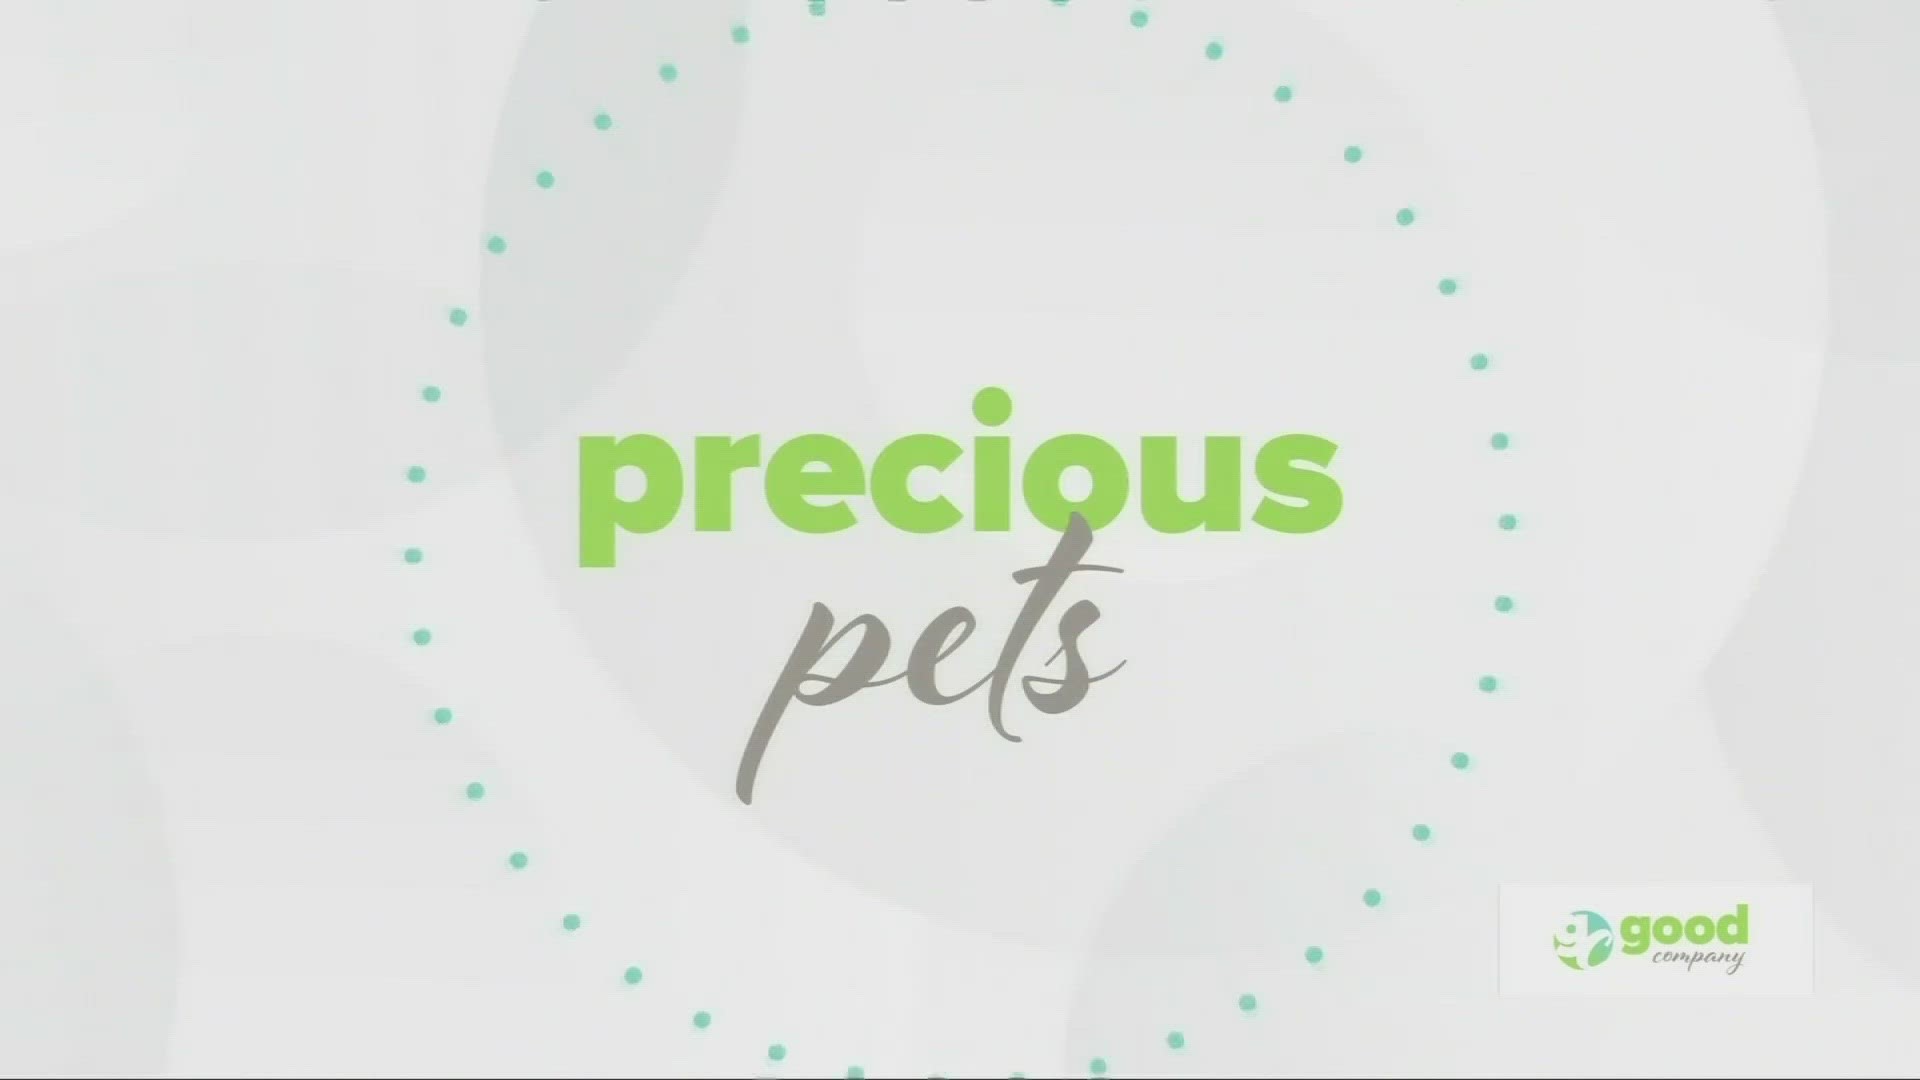 Joe talks with Kristen Levine aboutshowing our pets extra love in National Pet Month! Sponsored by: Slickdeals, iRobot, Project Watson and Banfield Pet Hospital